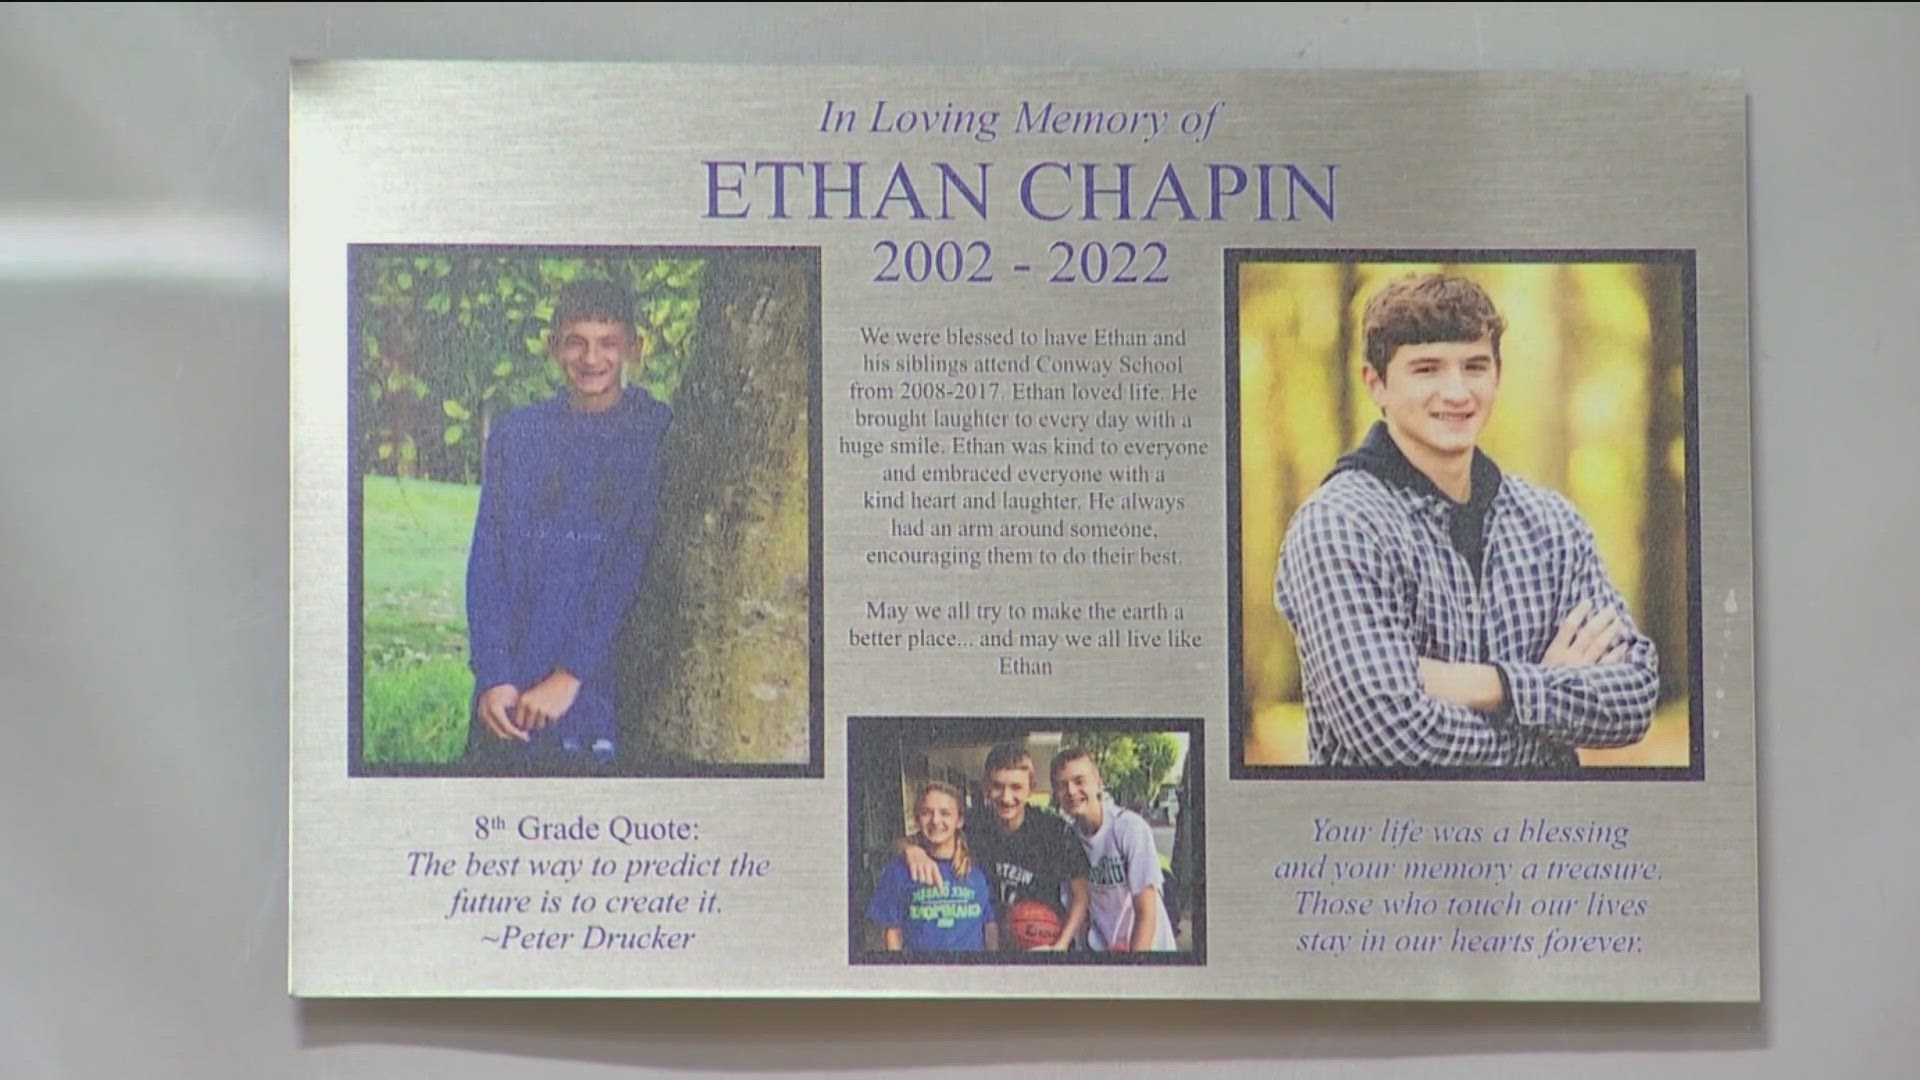 A combined $50,000 was distributed to students in memory of Ethan Chapin, a Mount Vernon High School alum who left his mark on the community.